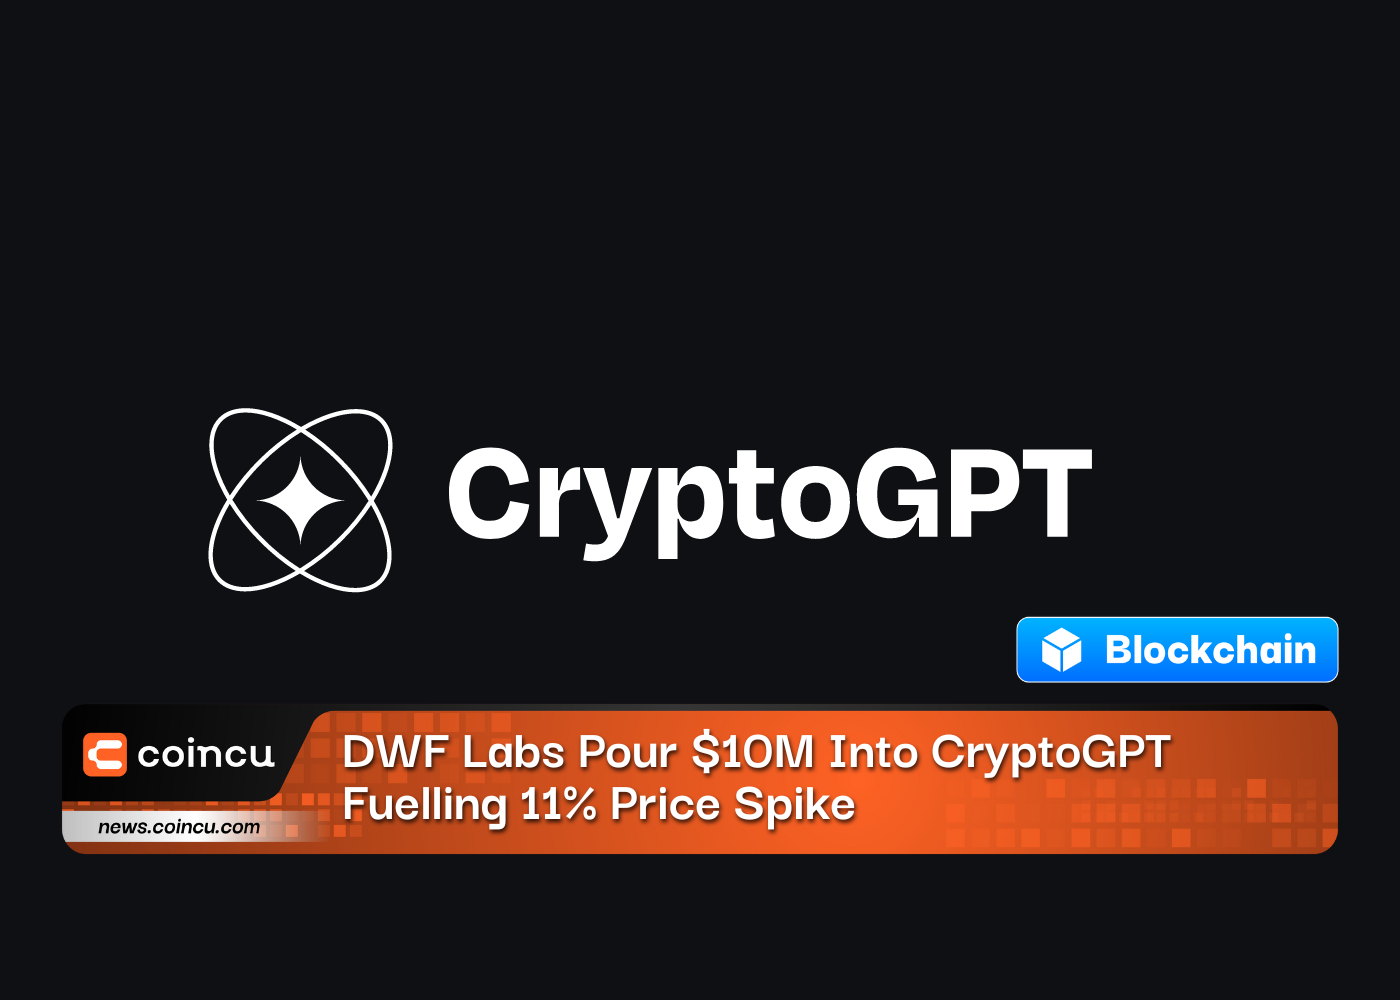 DWF Labs Pour $10M Into CryptoGPT, Fuelling 11% Price Spike